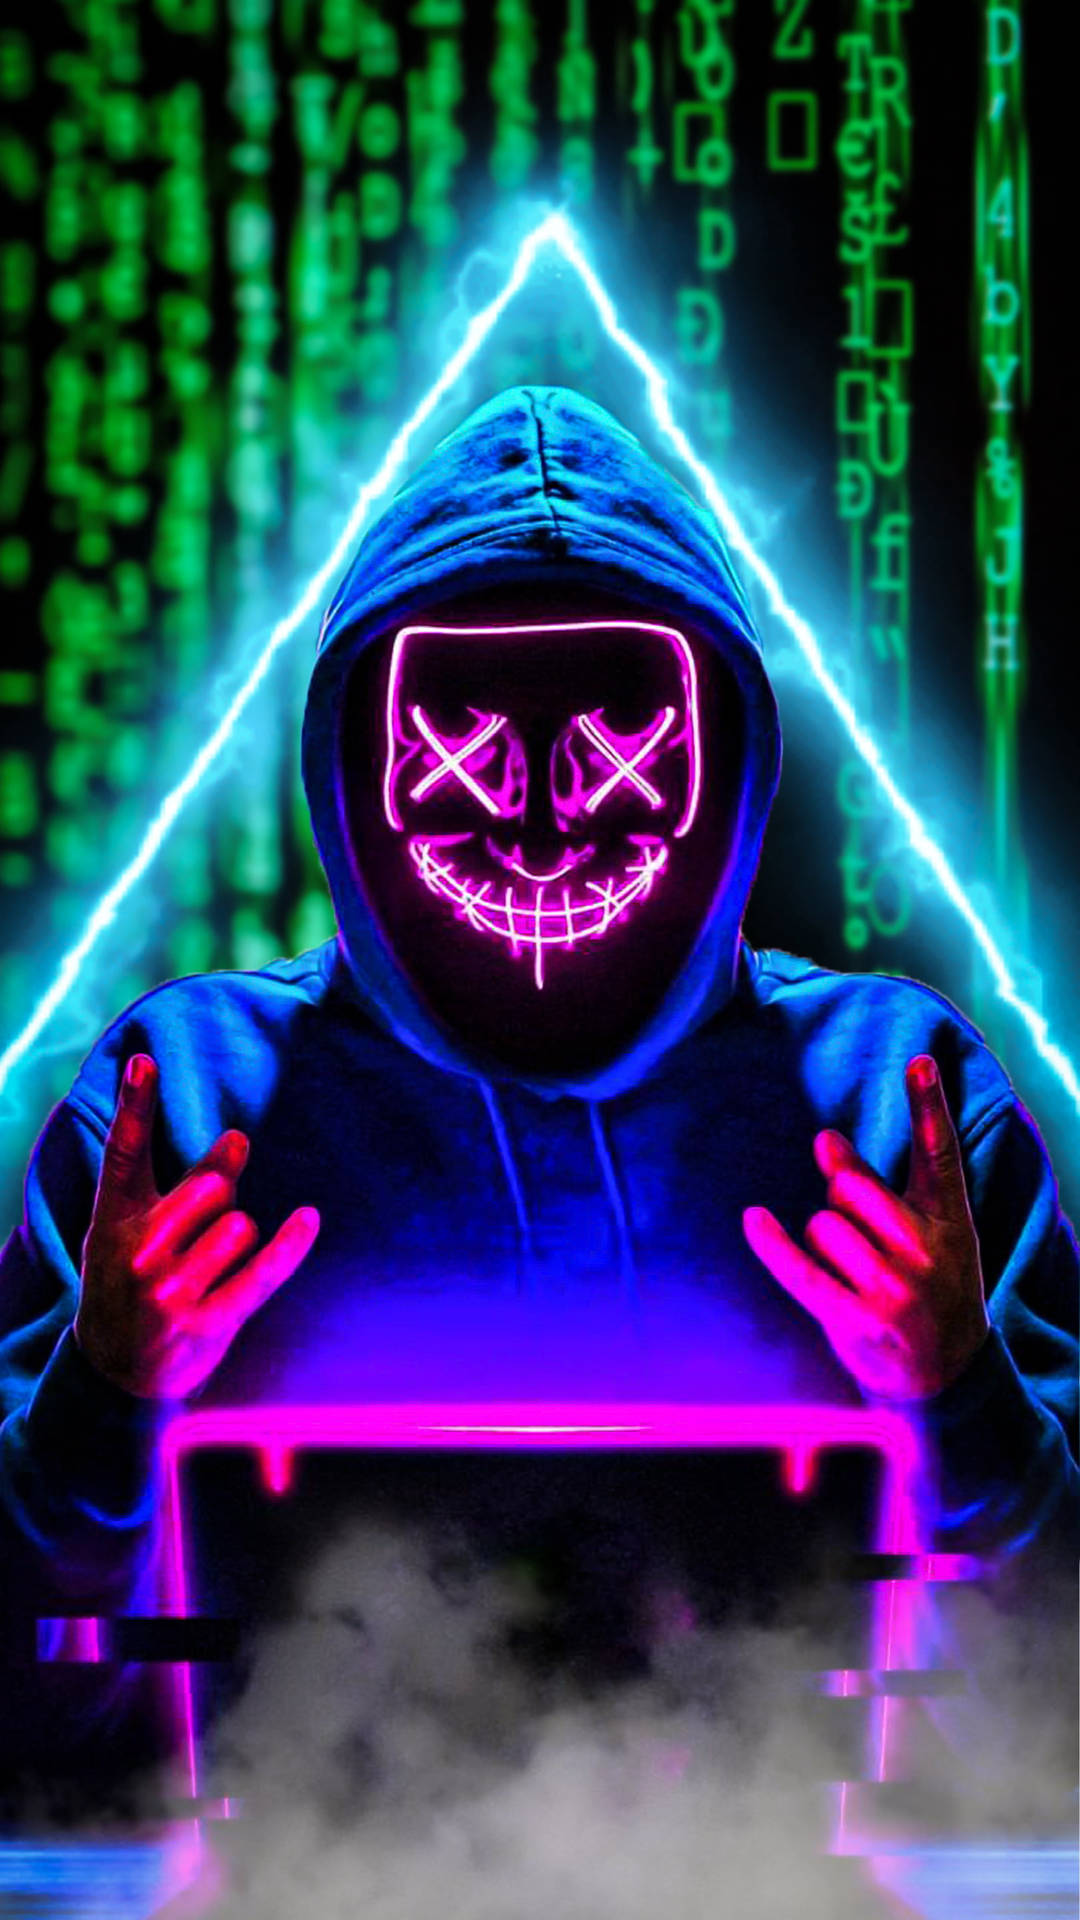 Neon Hacker With Triangle Hacking Android Wallpaper